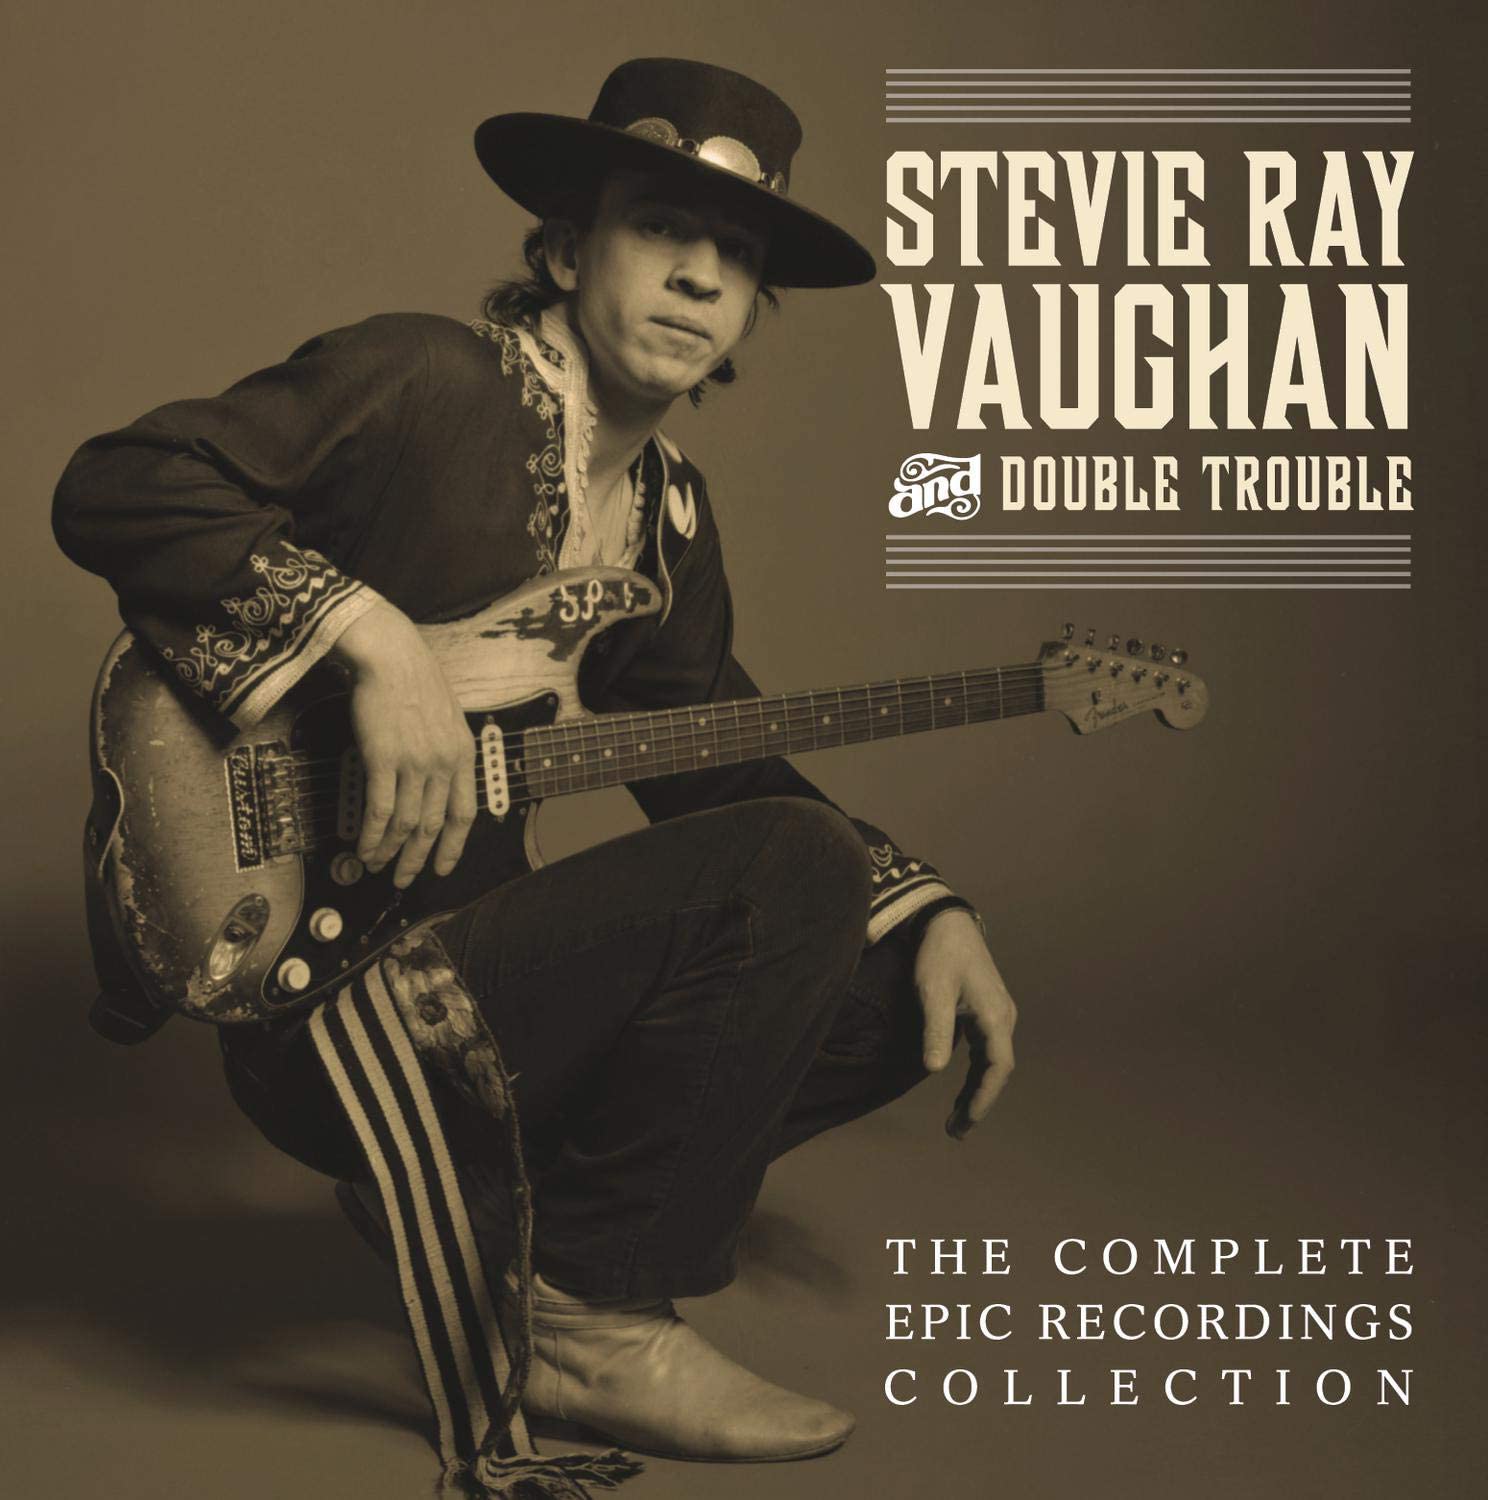 stevie ray vaughan the complete epic recordings